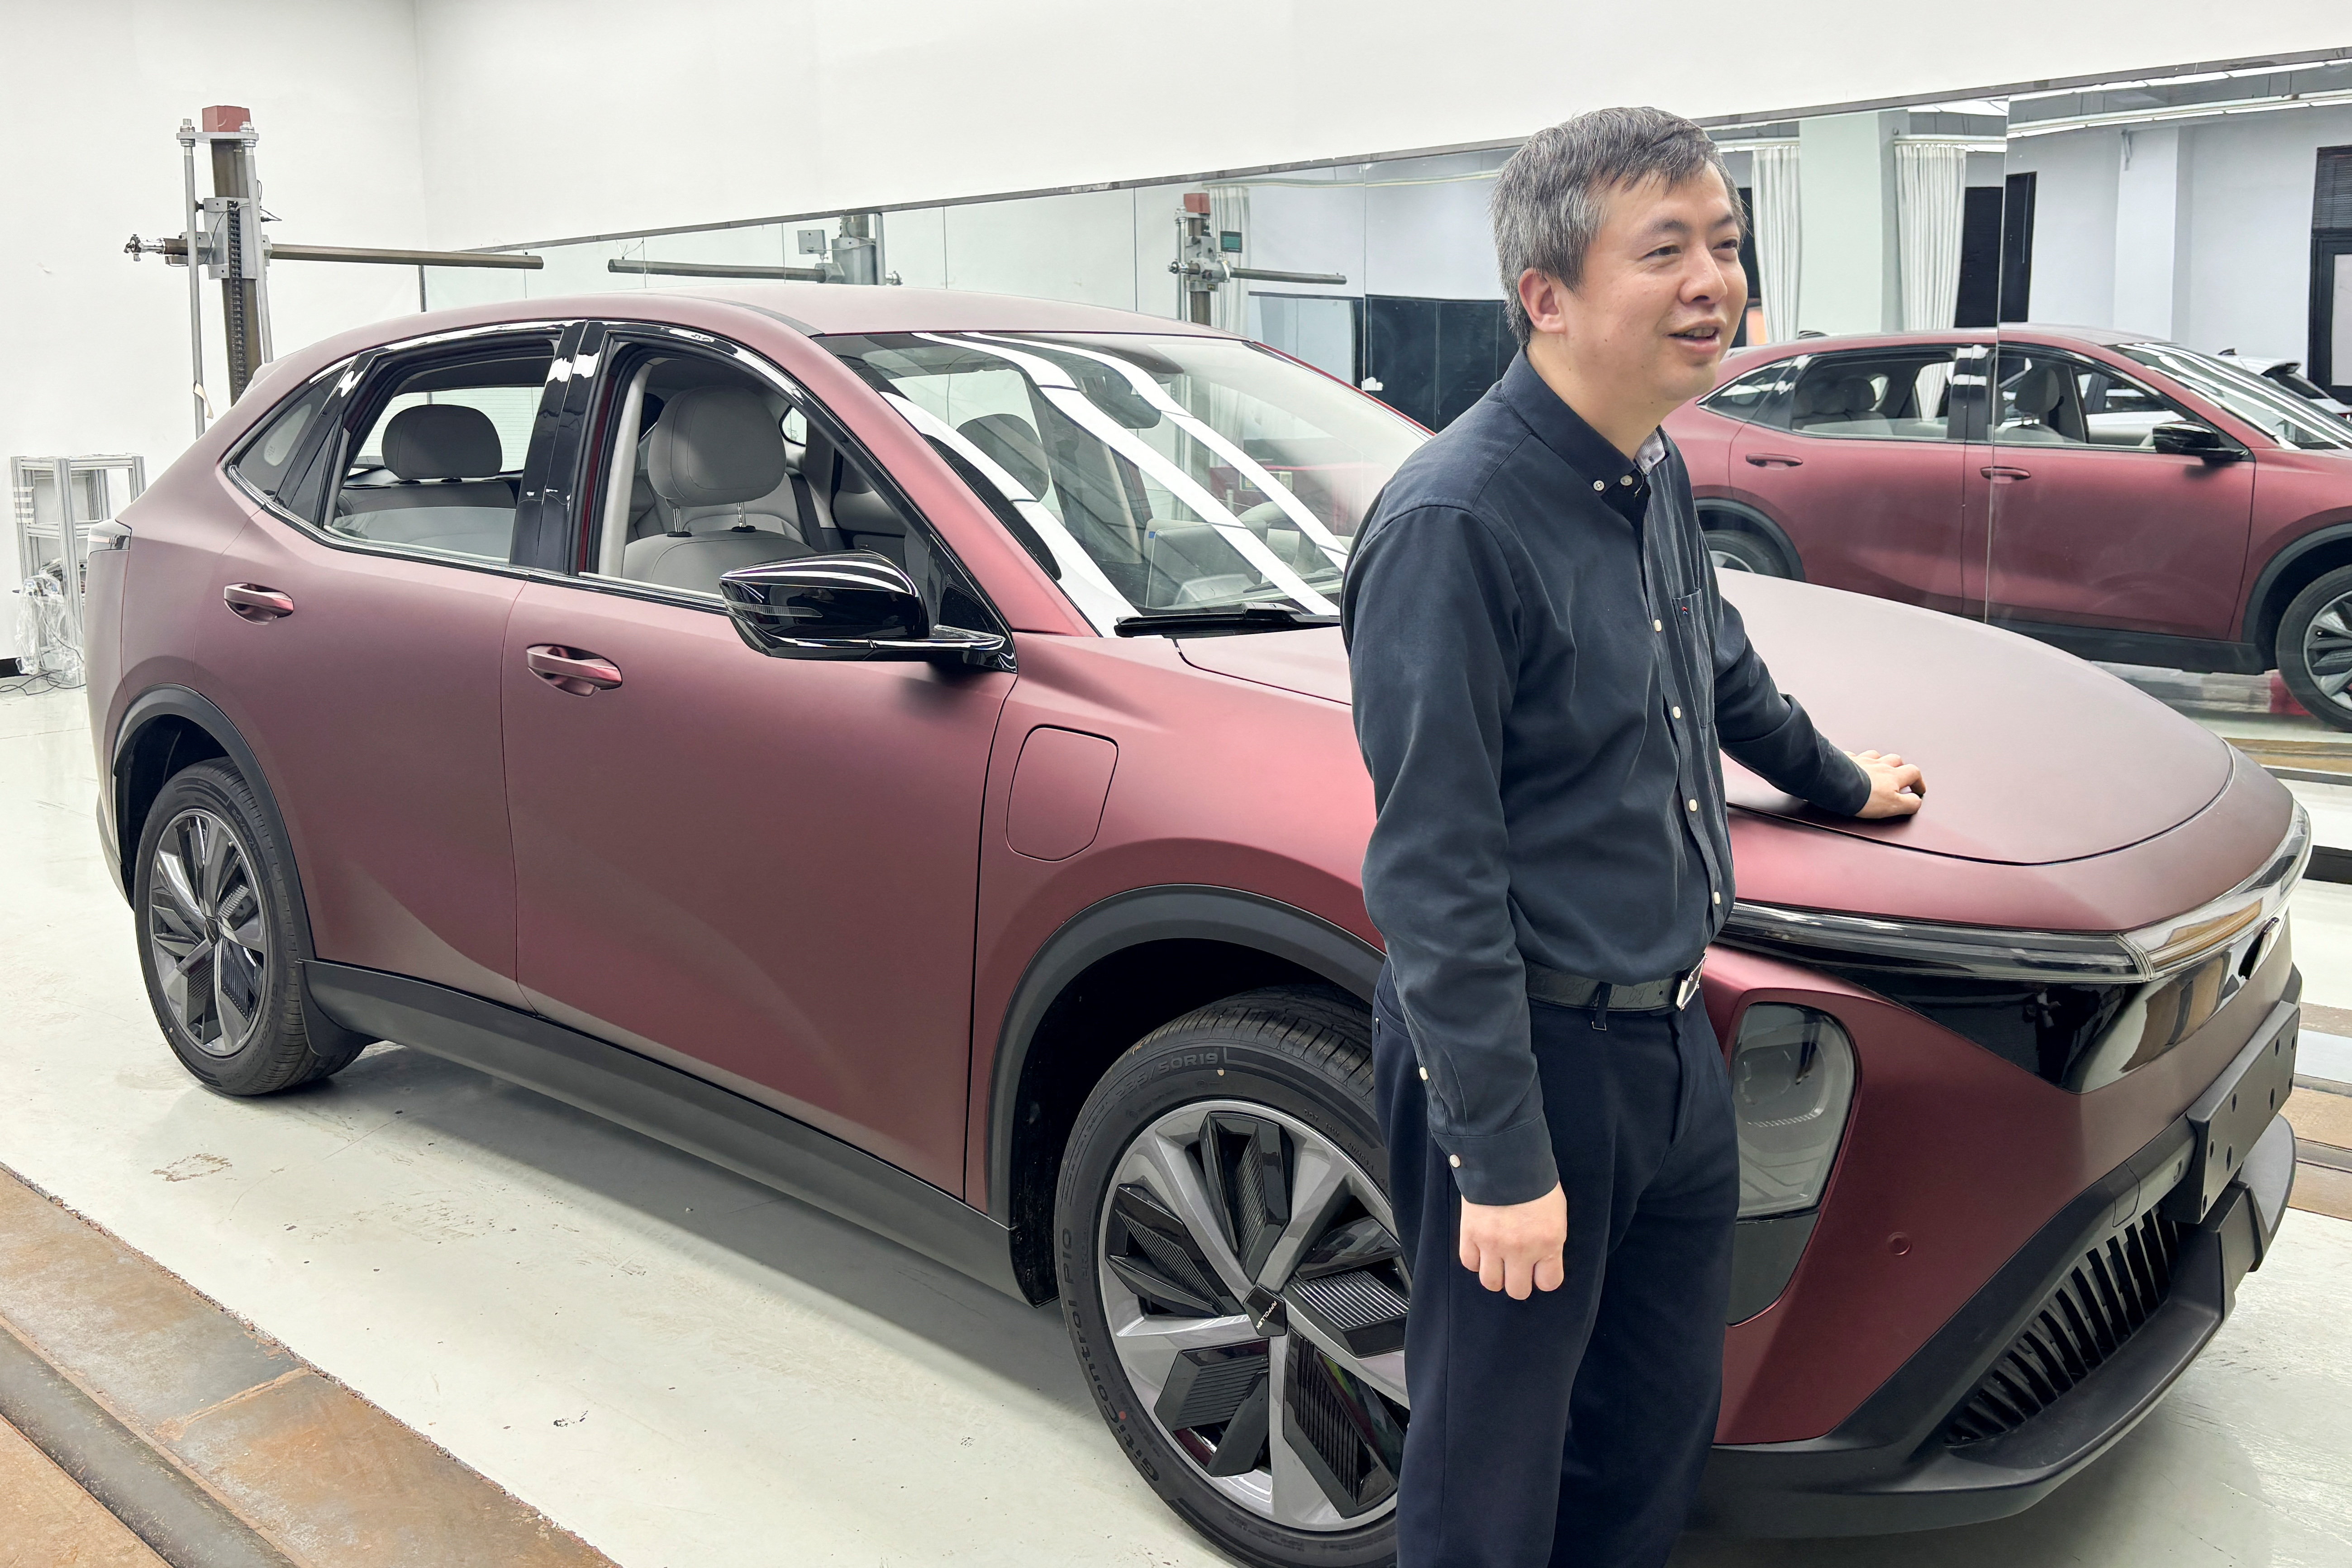 Wang Xun, founder and chairman of the auto design and engineering firm Launch Design, poses for a picture next to a prototype vehicle at the company's office in Shanghai